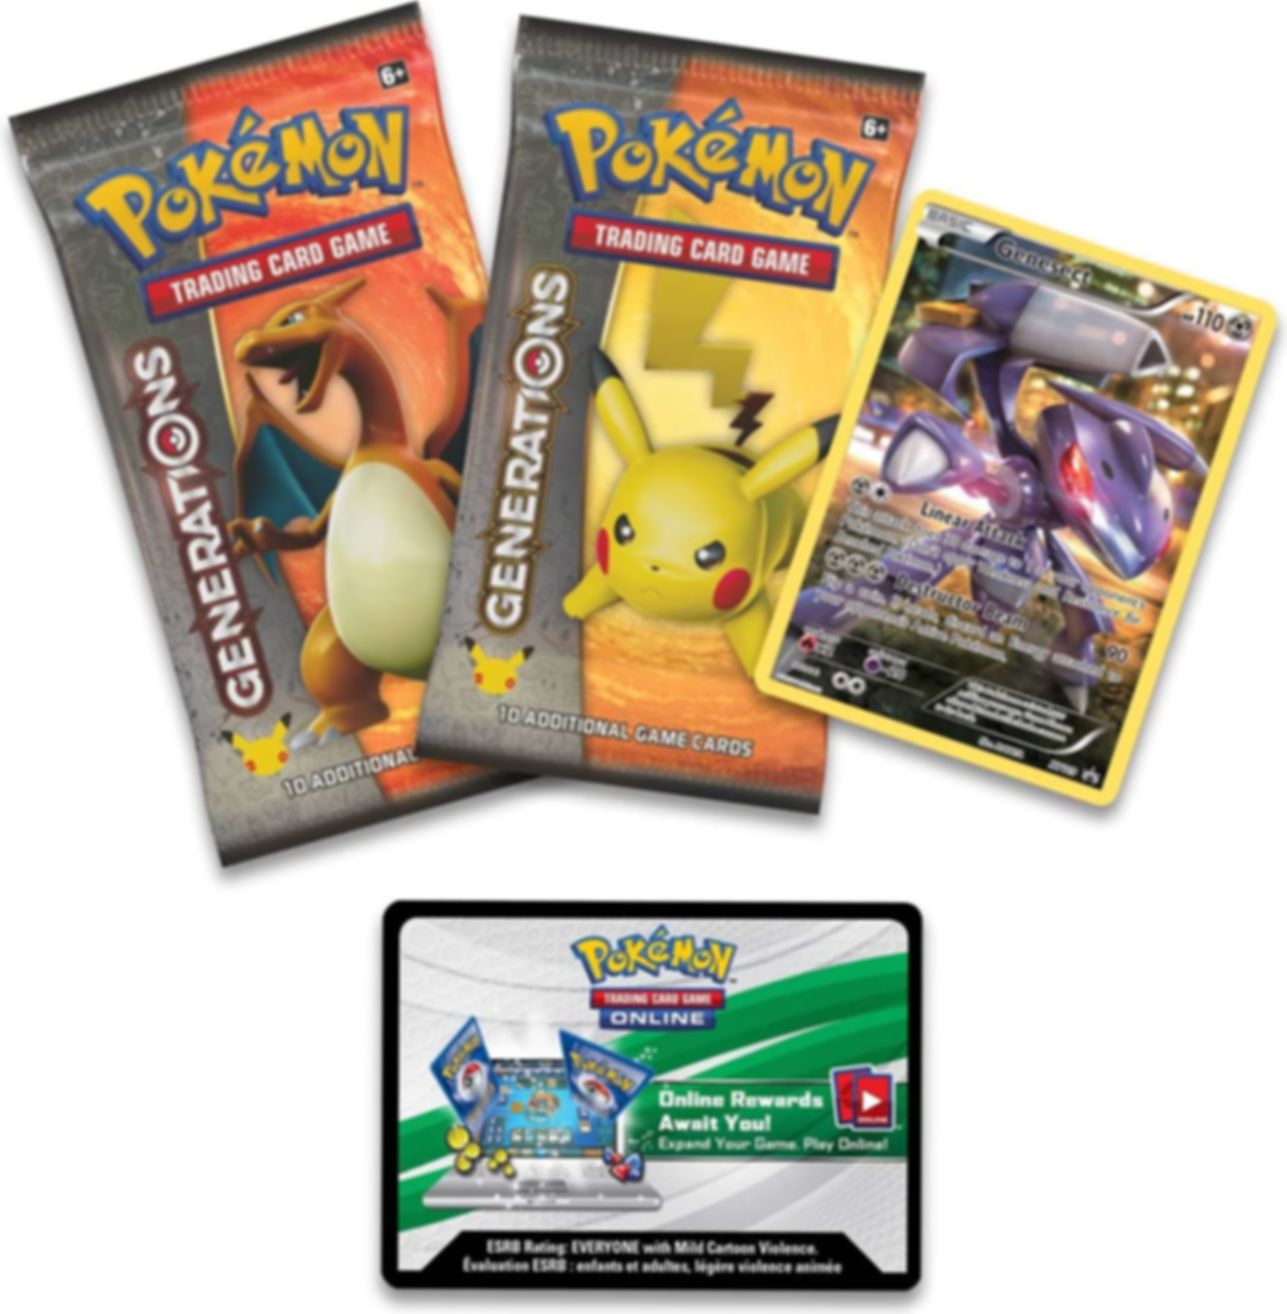 Pokémon Genesect Mythical Cards Collection Box components